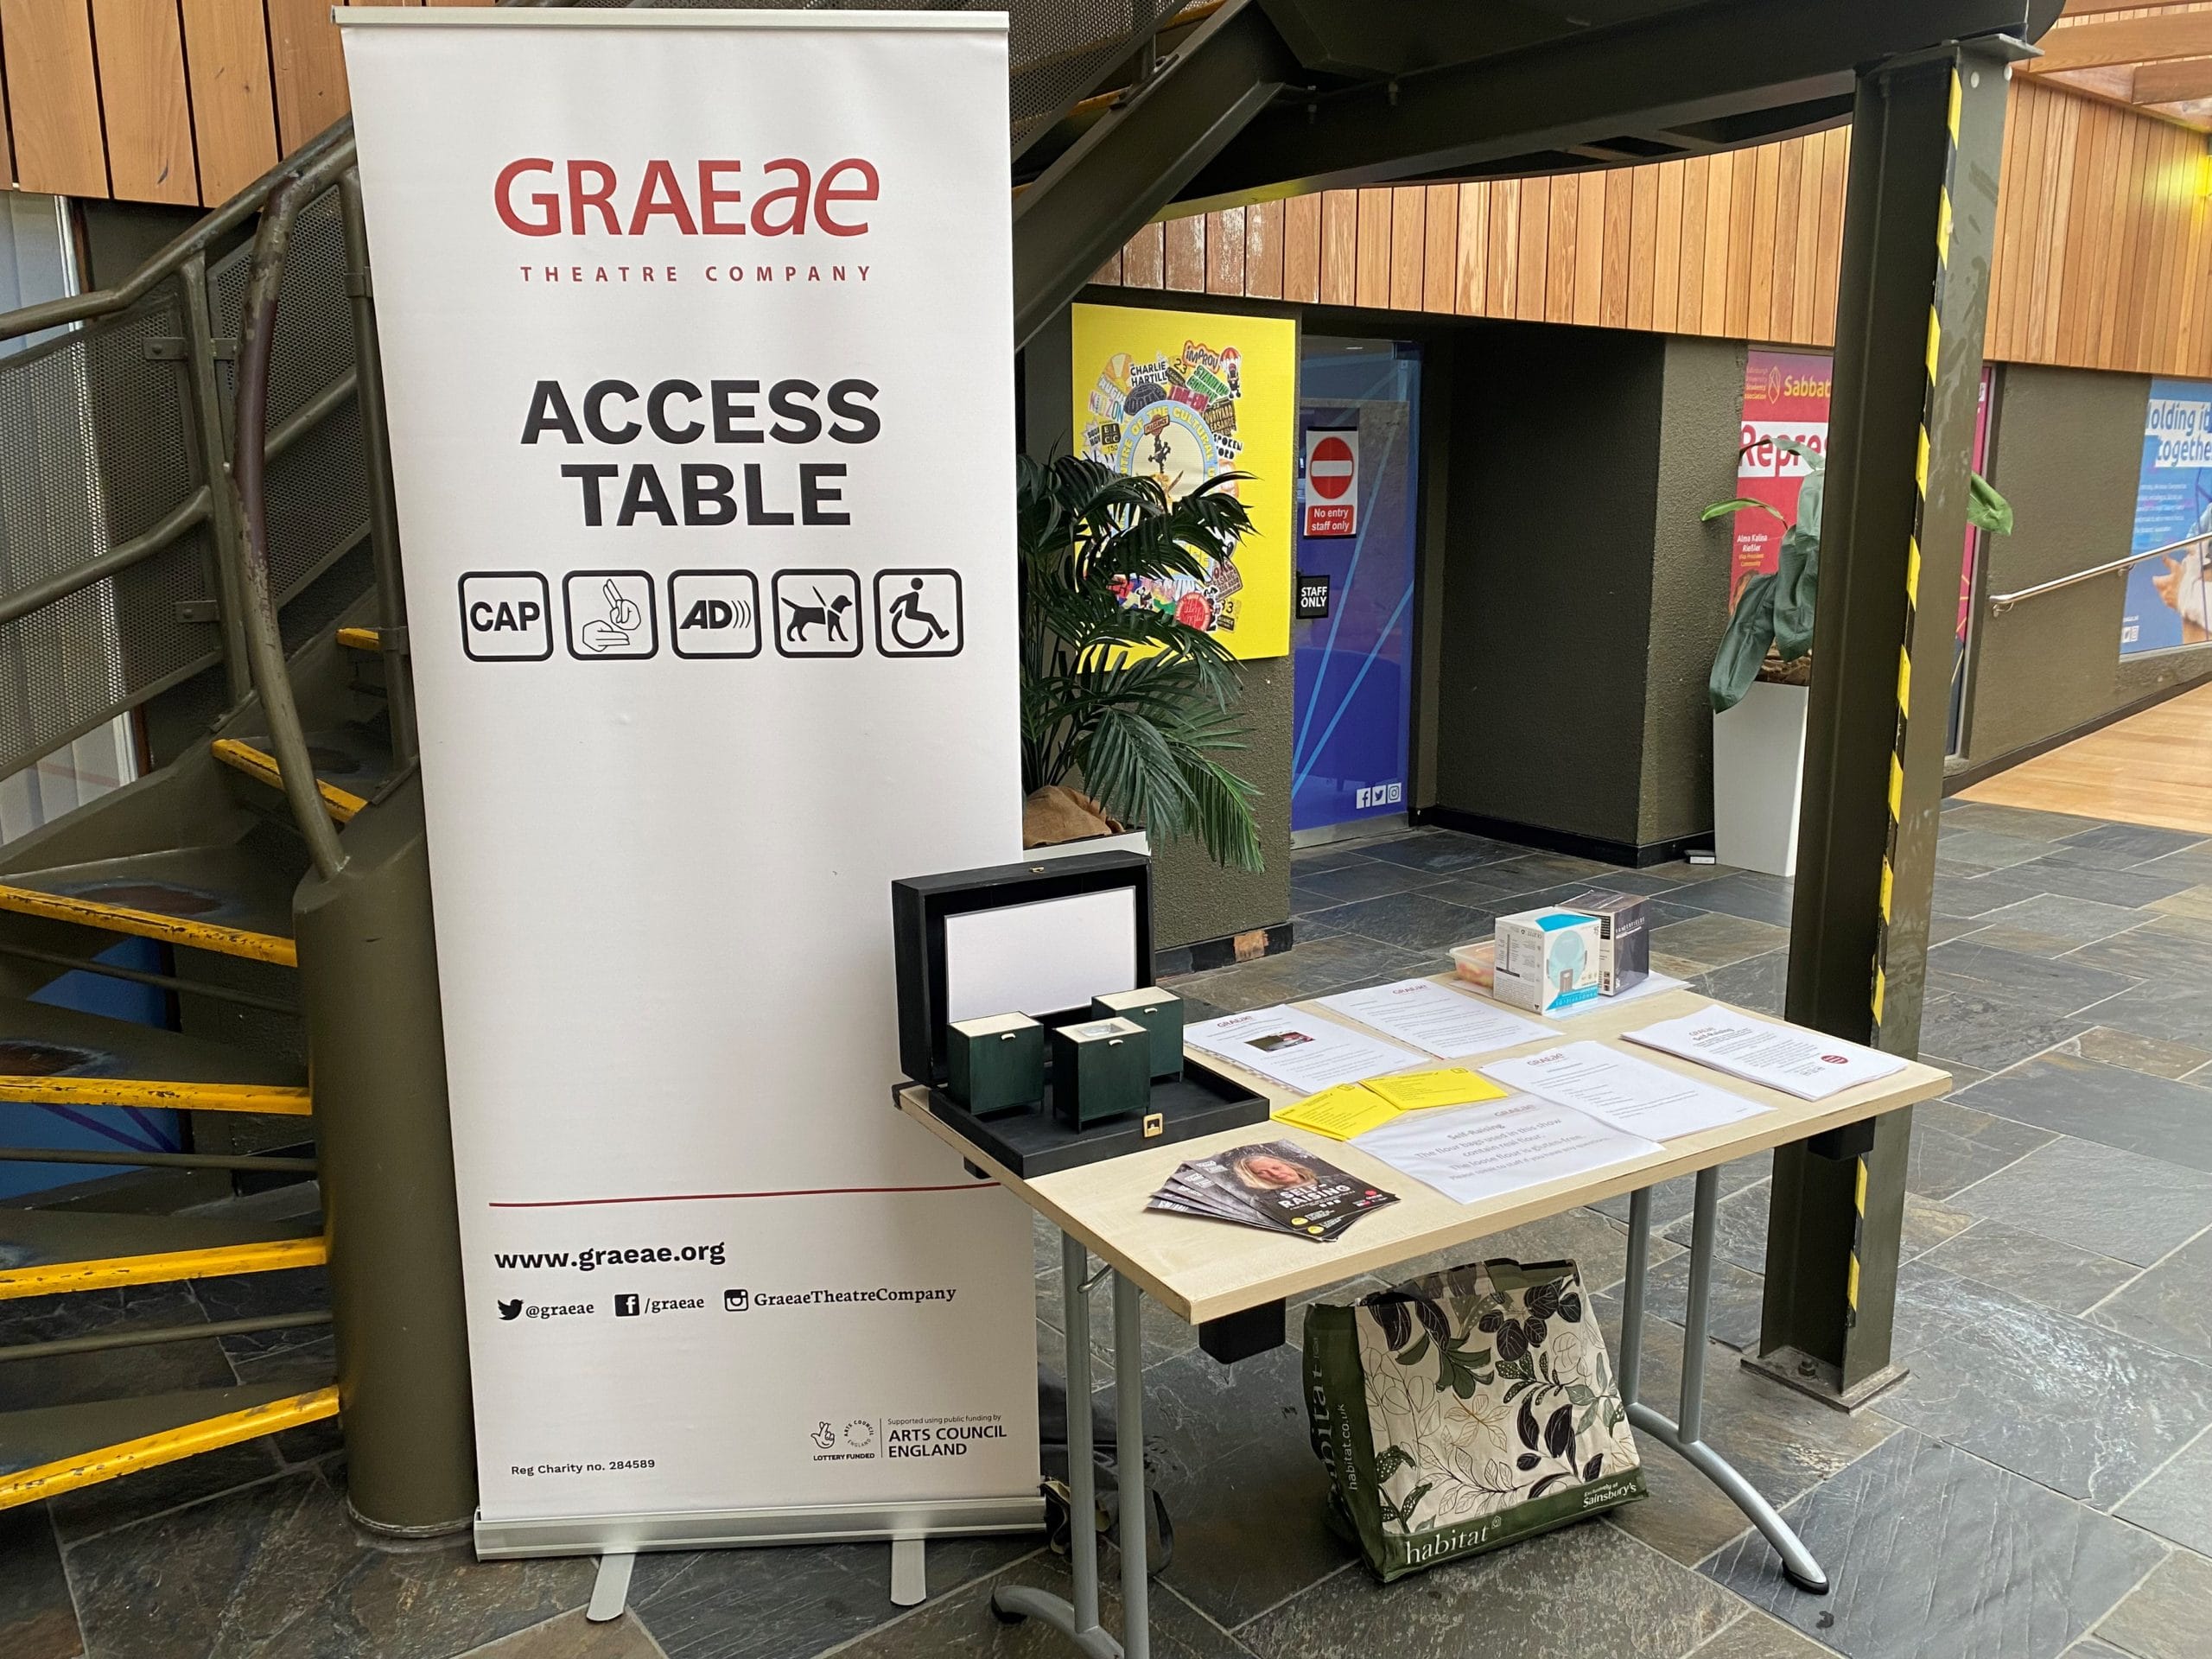 A Graeae access table; there is a large poster to the left of the table that says 'Access Table'. The table itself is littered with flyers and information papers.